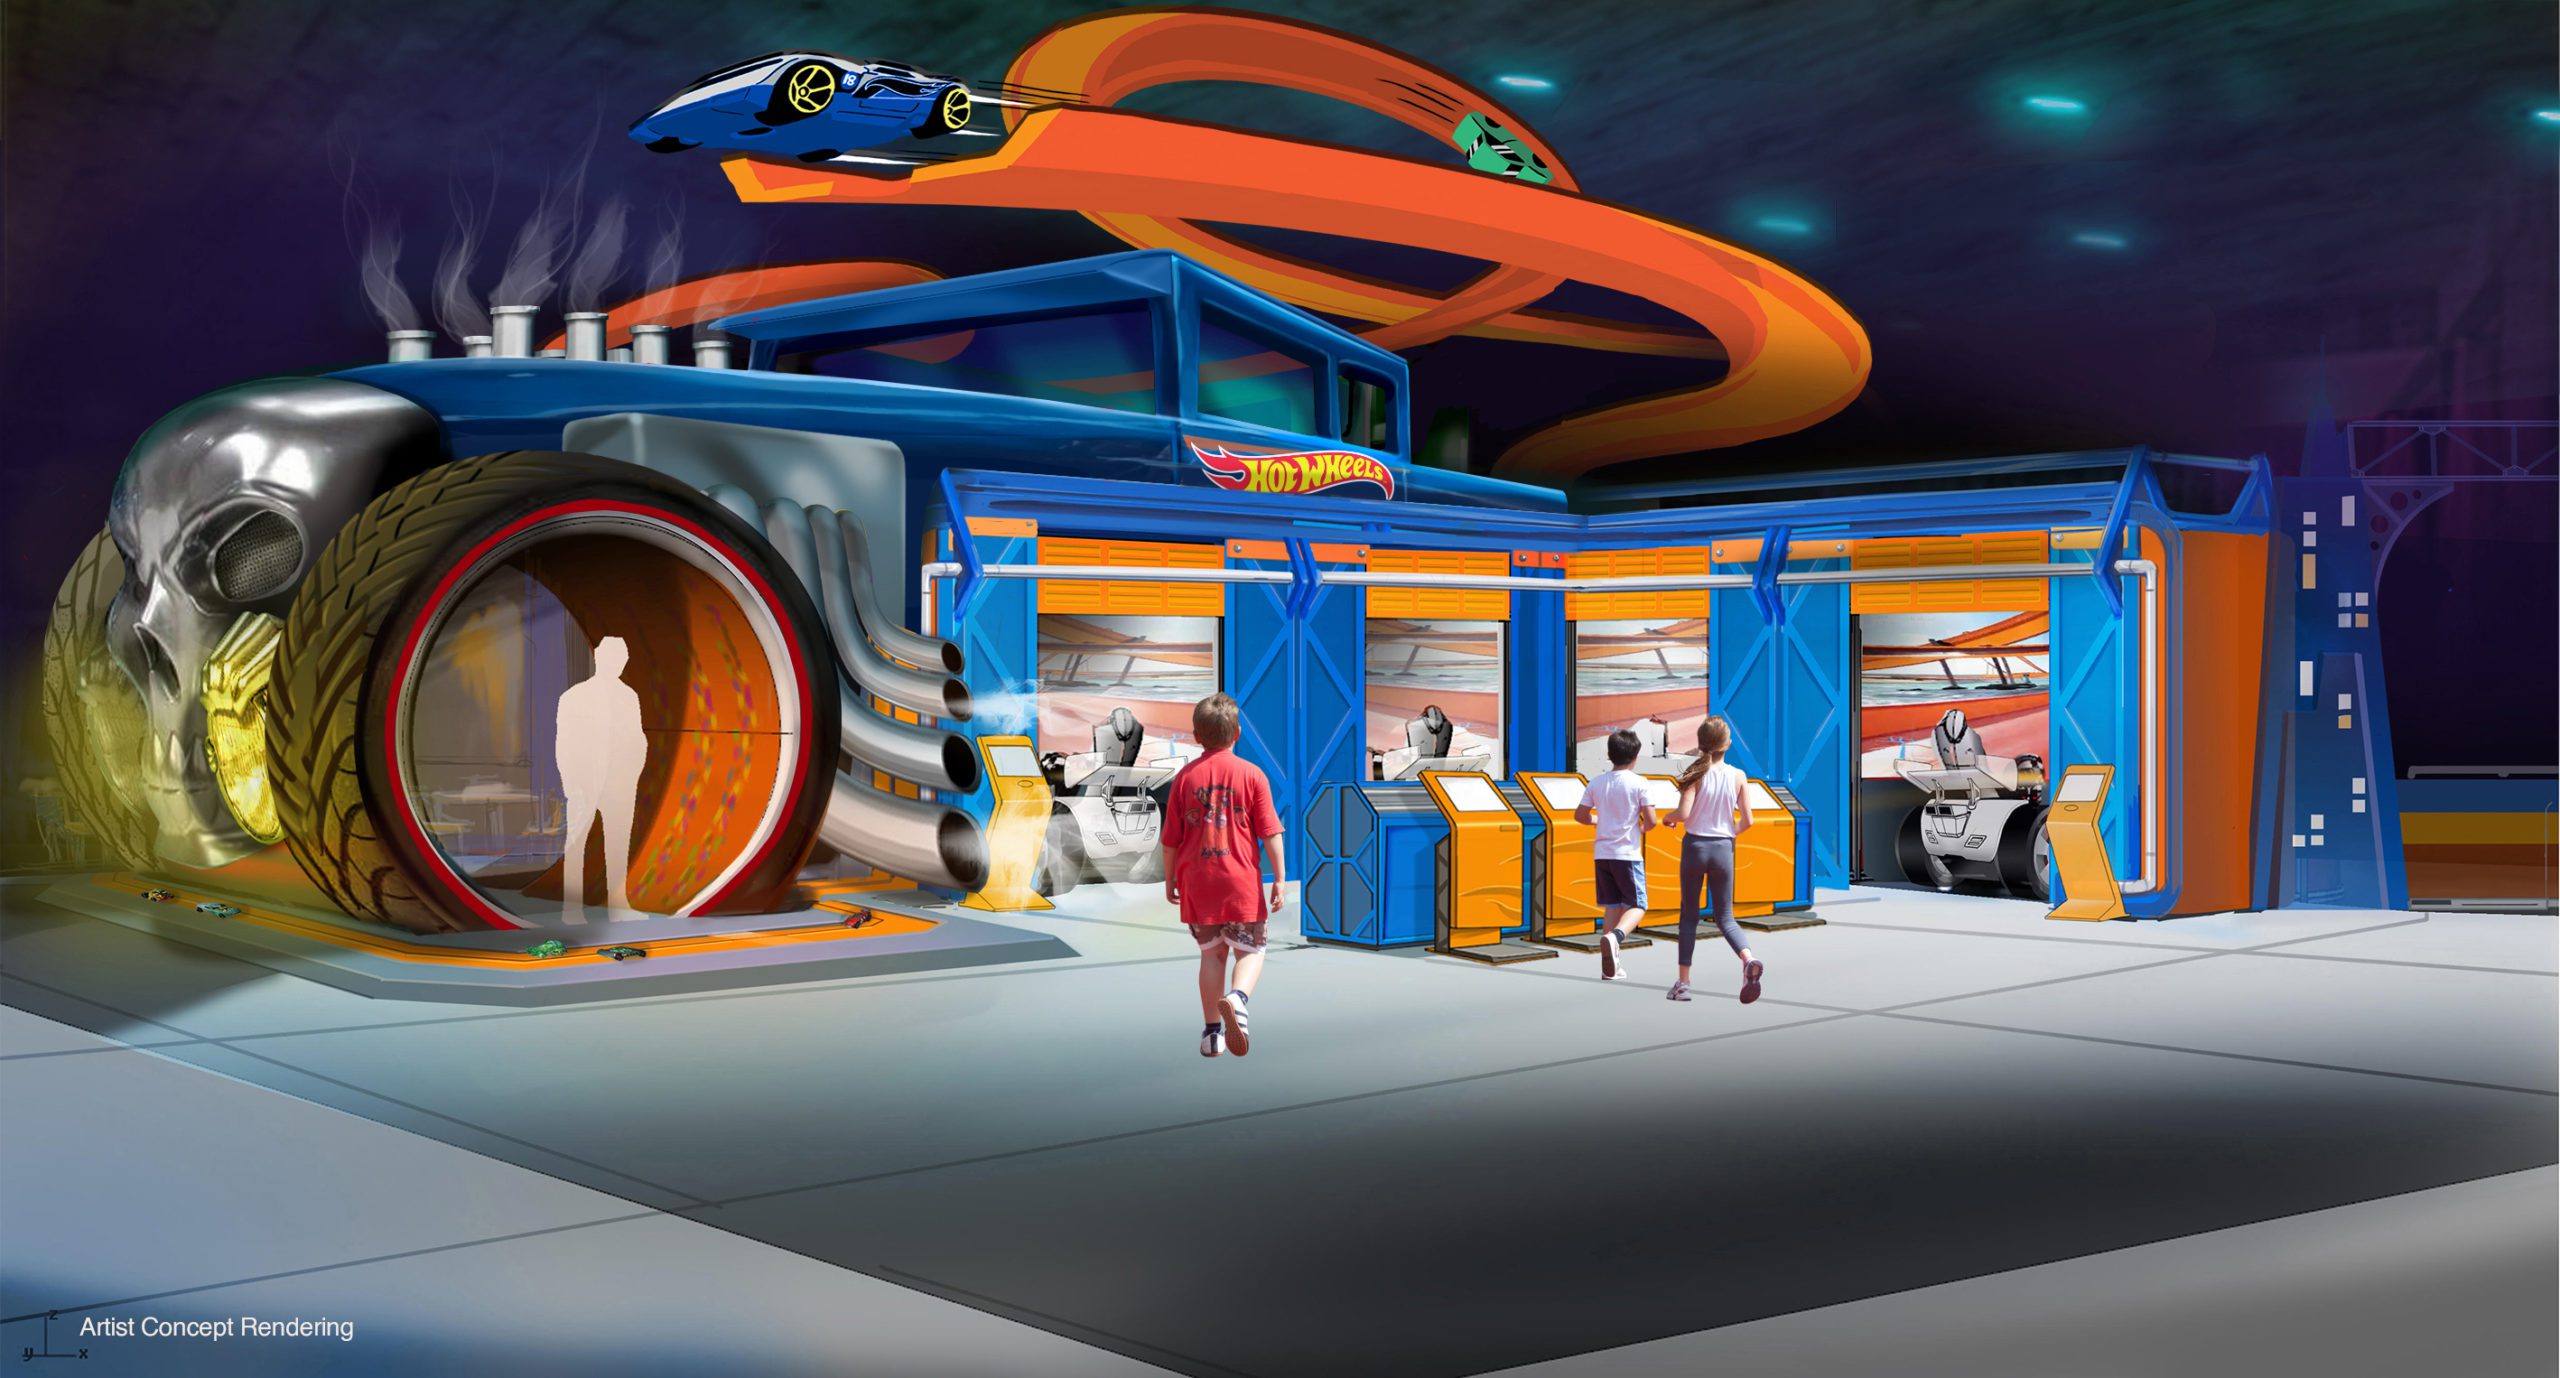 A concept image of a Hot Wheels themed area